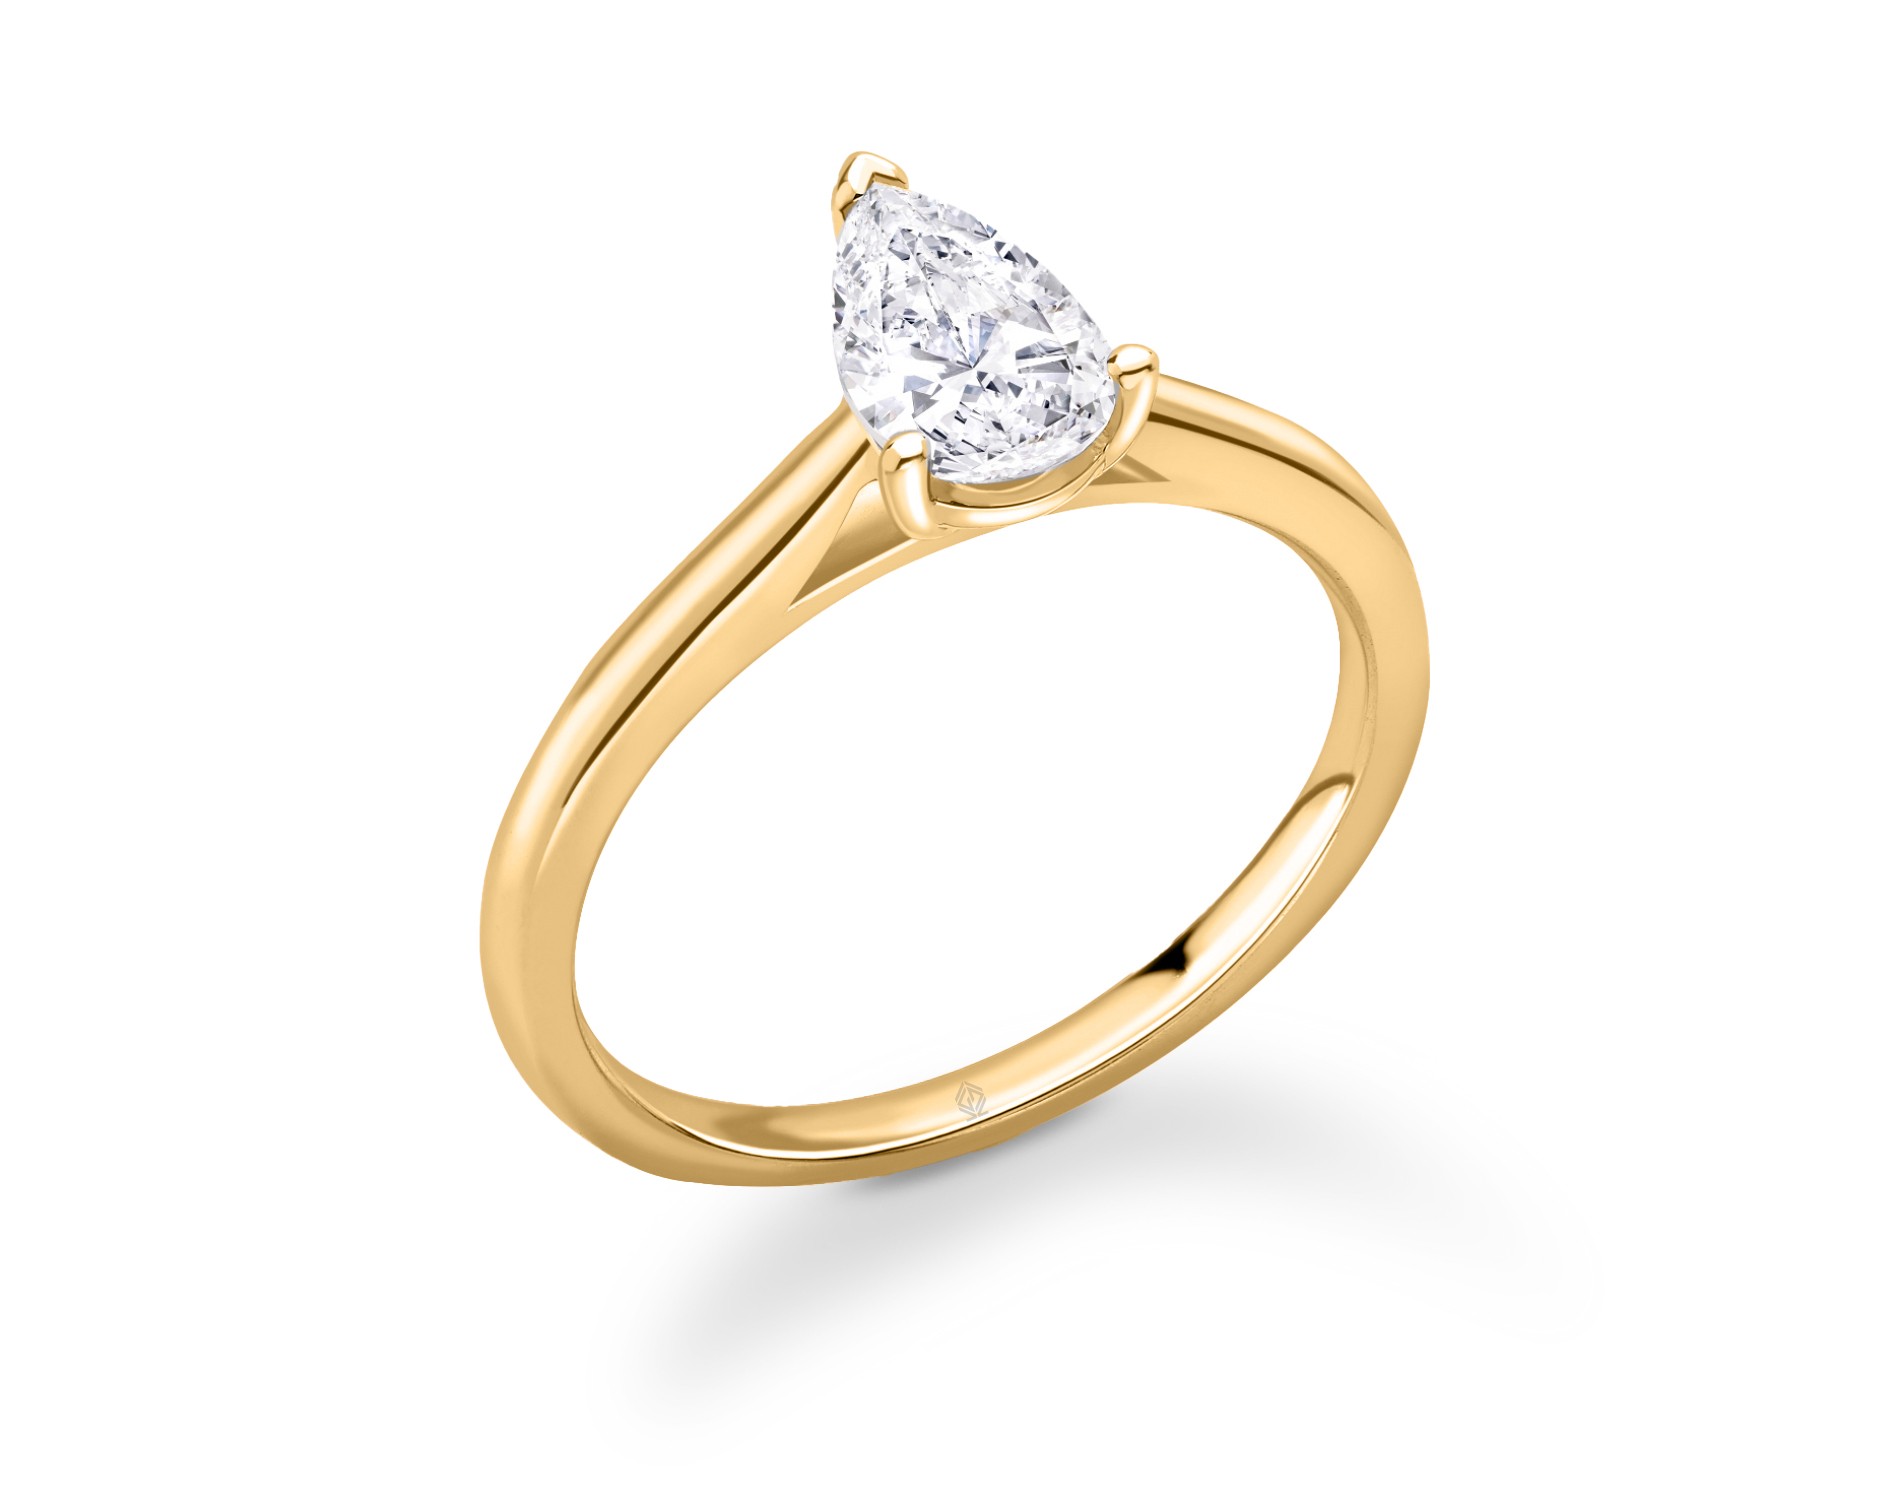 18K YELLOW GOLD PEAR CUT SOLITAIRE DIAMOND ENGAGEMENT RING